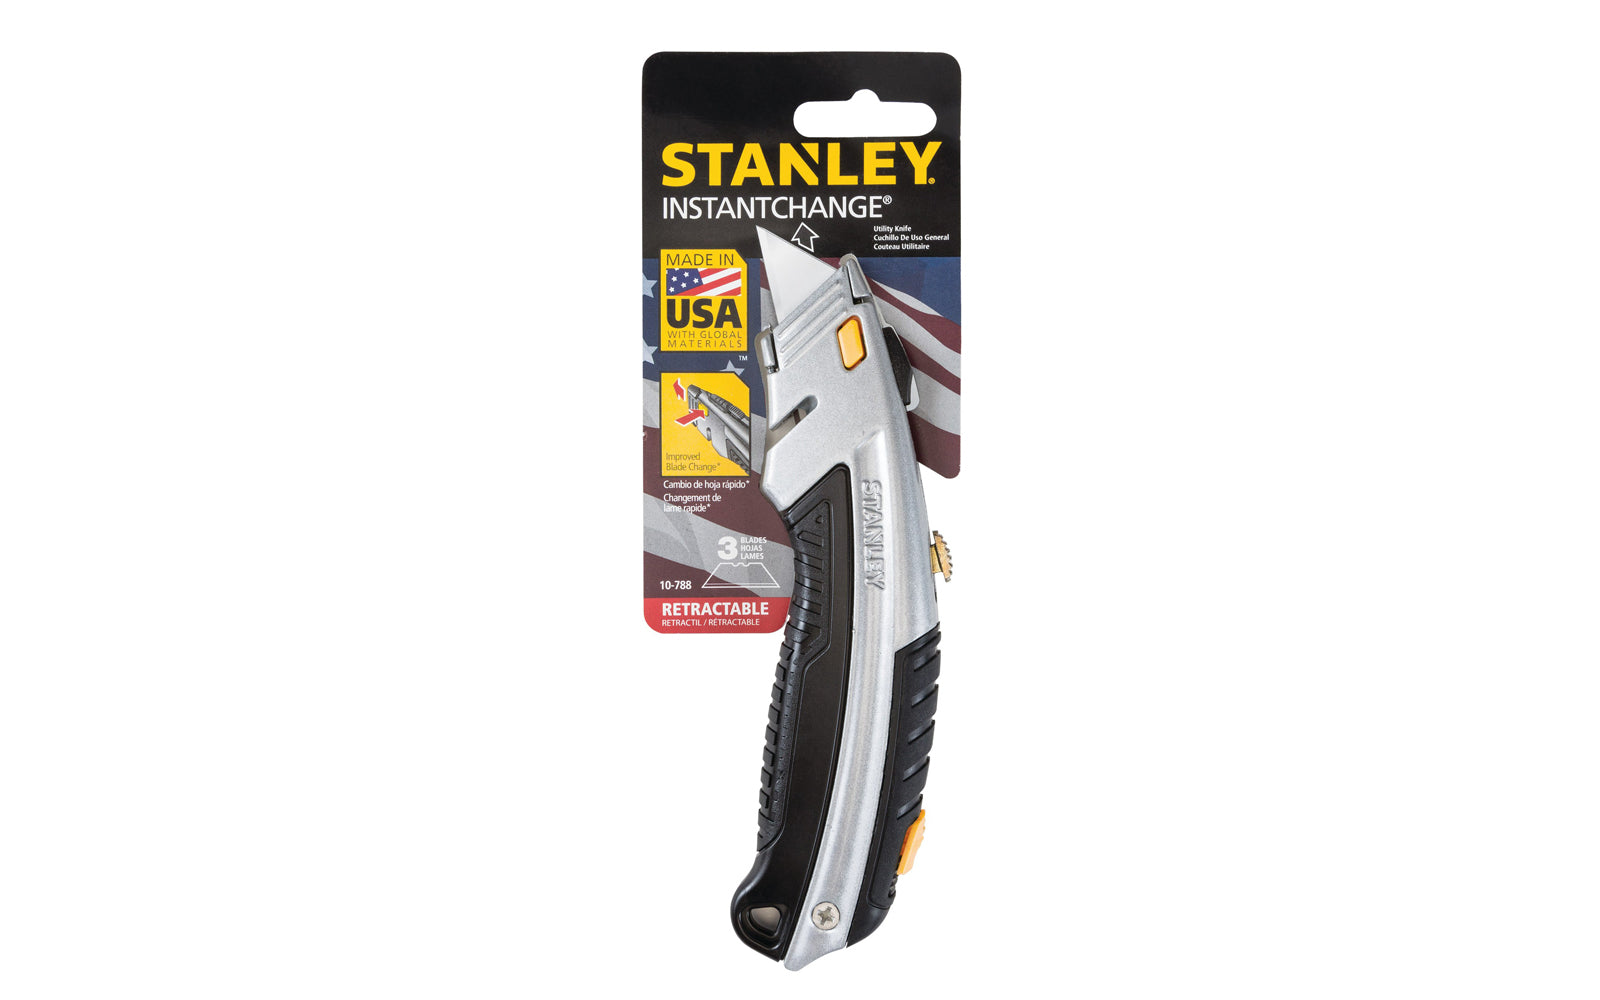 Where Are Stanley Hand Tools Made